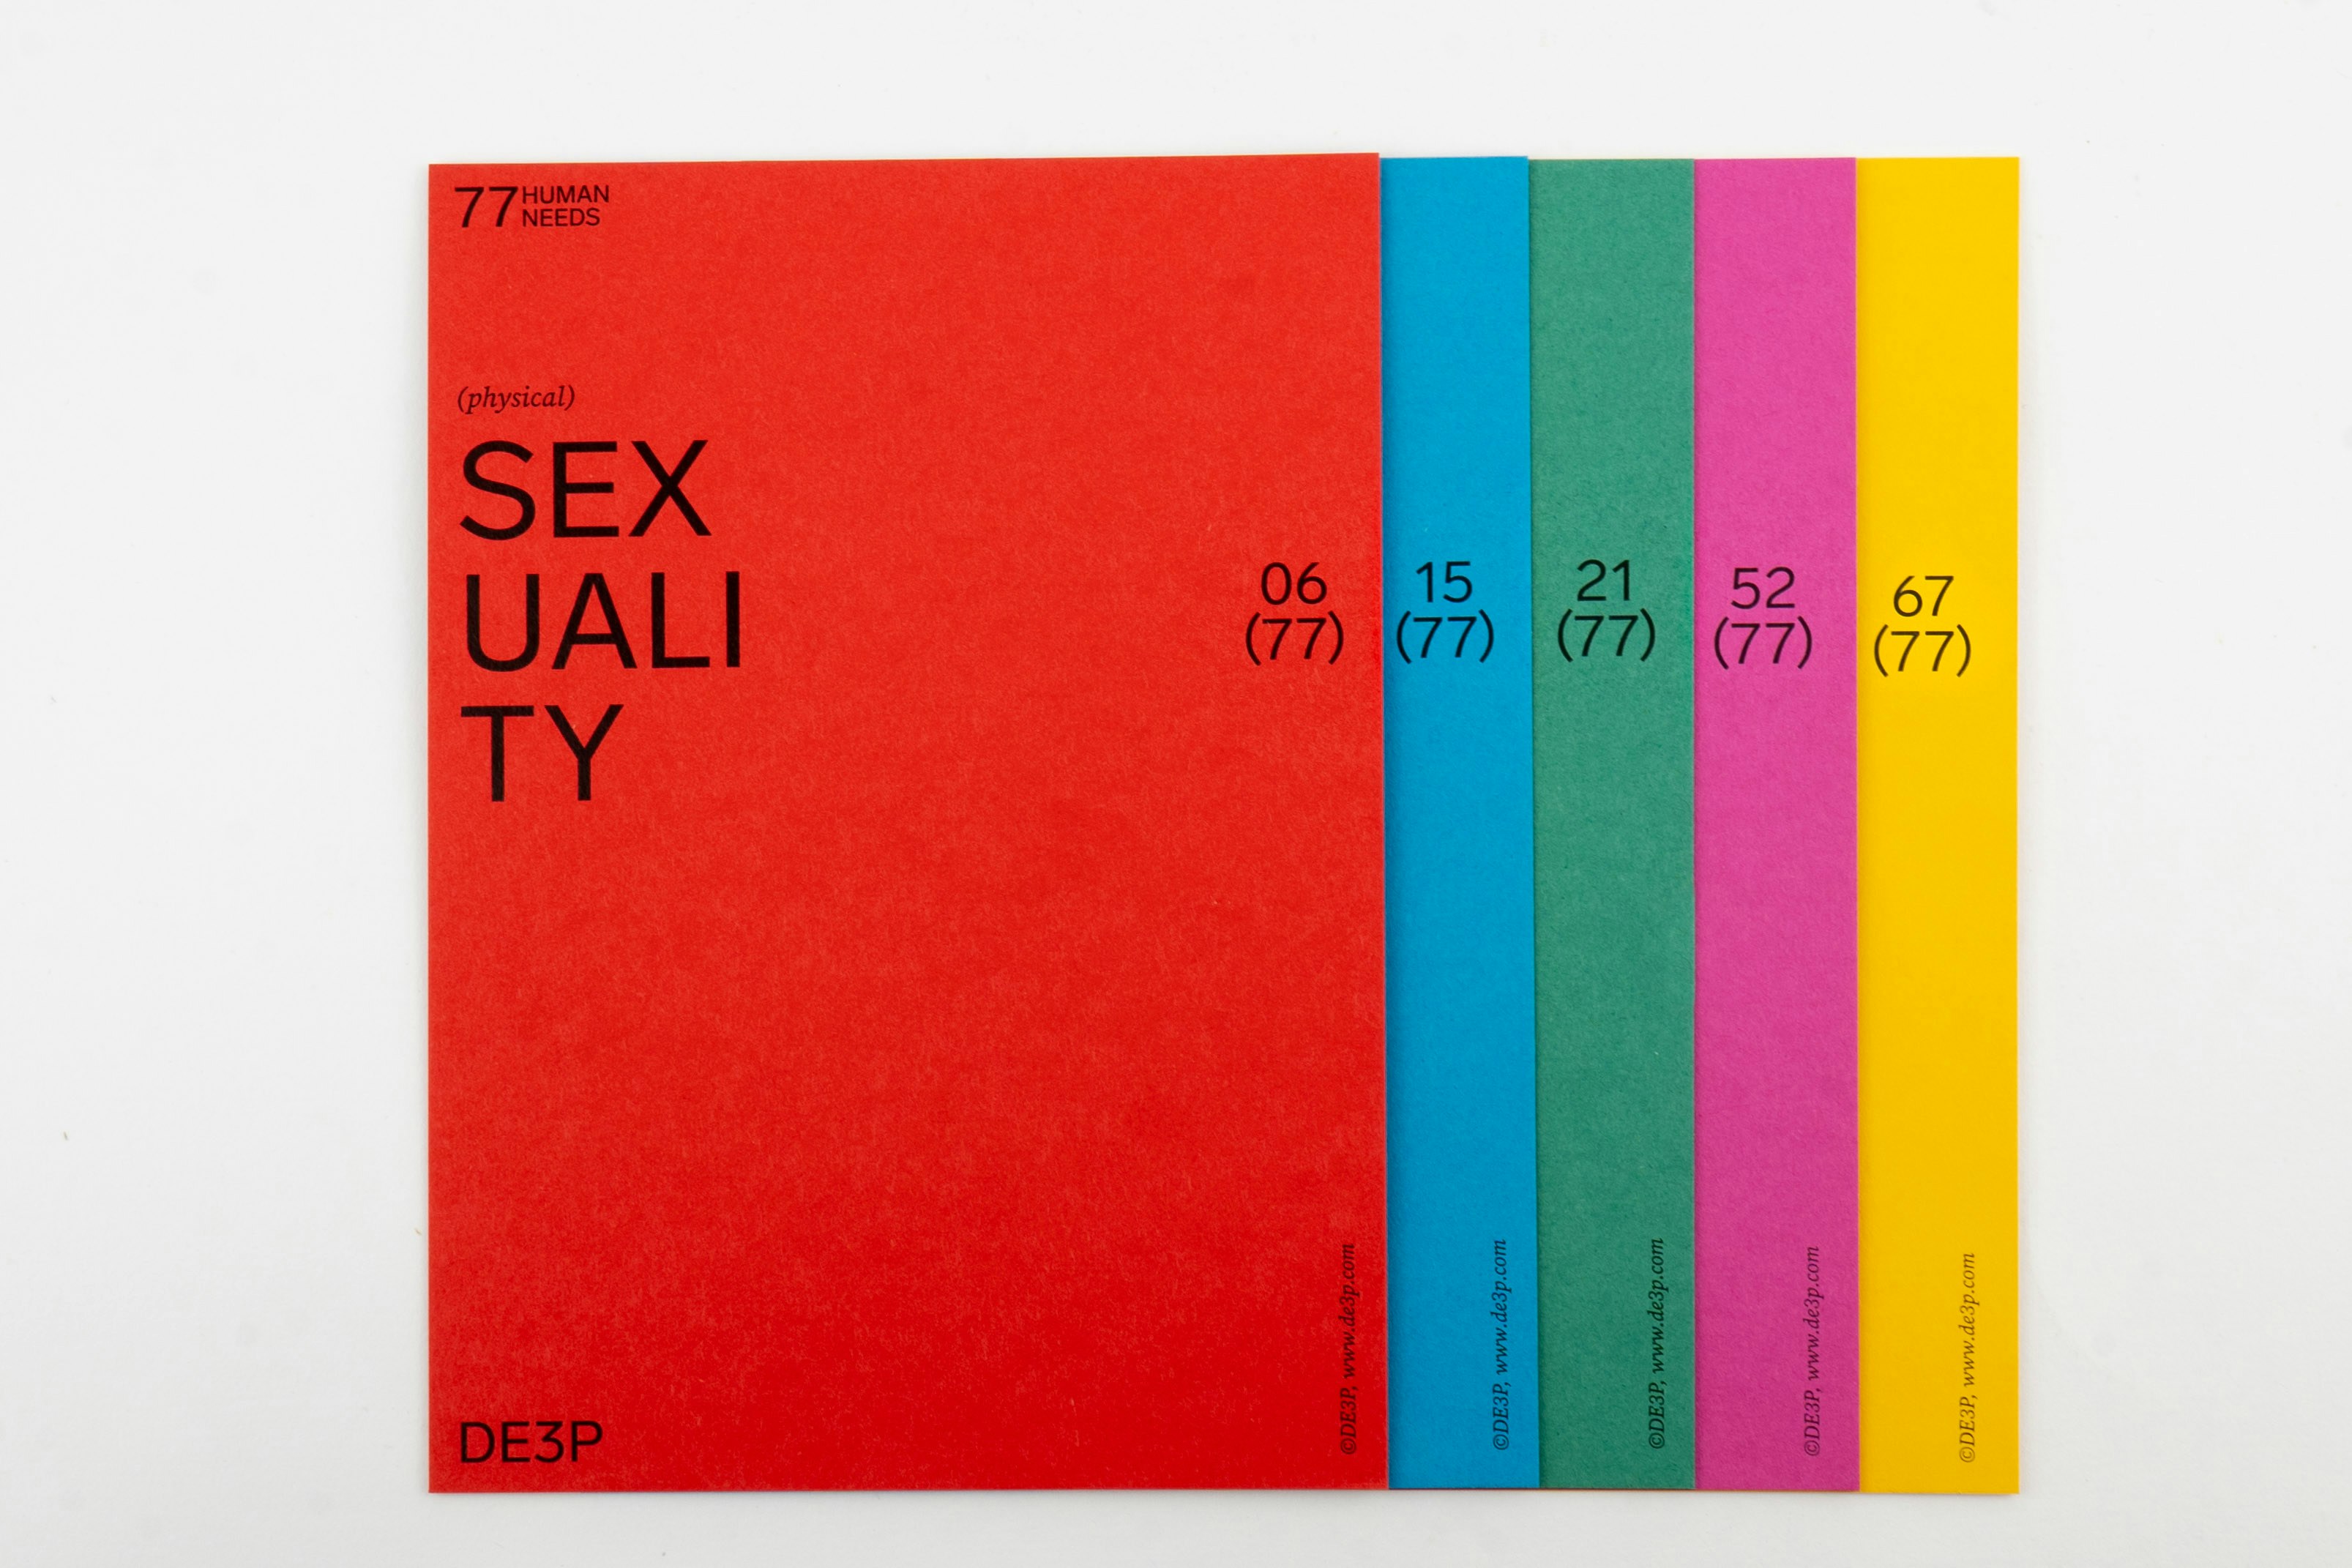 Findings on the State of Specialized Sexuality Education